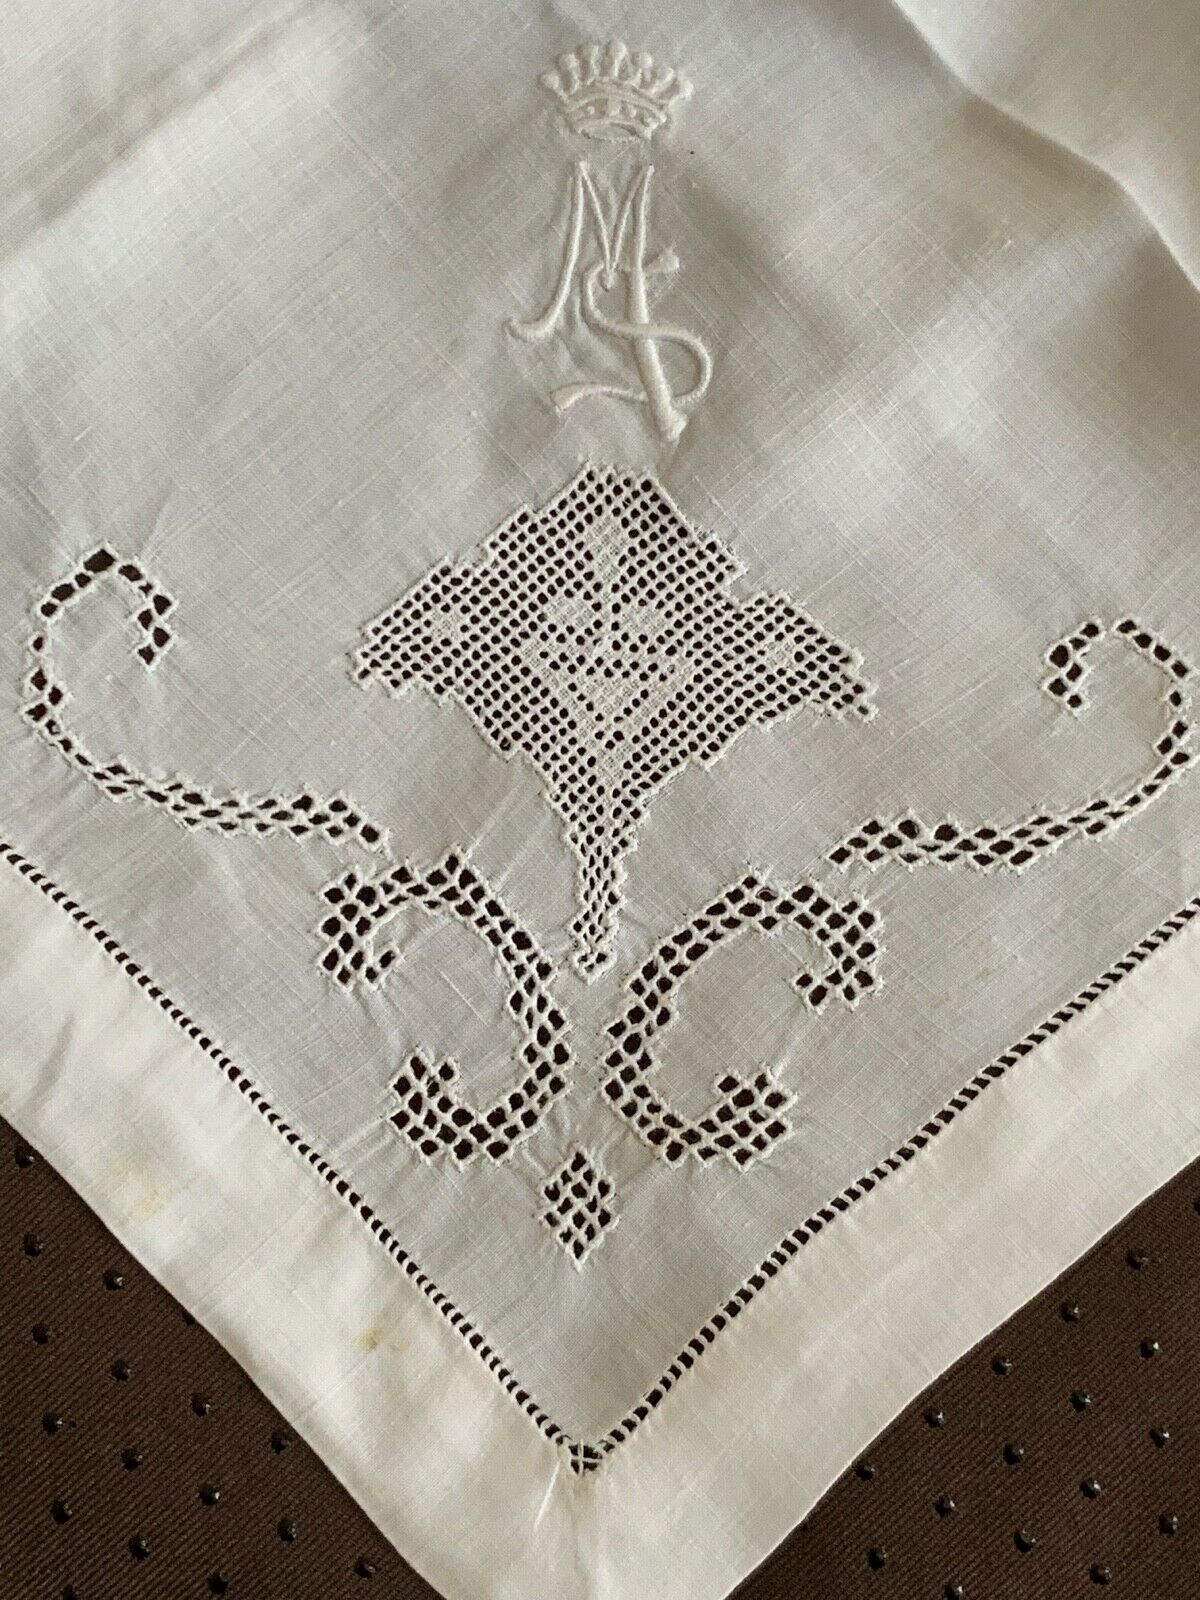 Antique French handkerchief, Hand embroidered with Count Crown & Initials MS